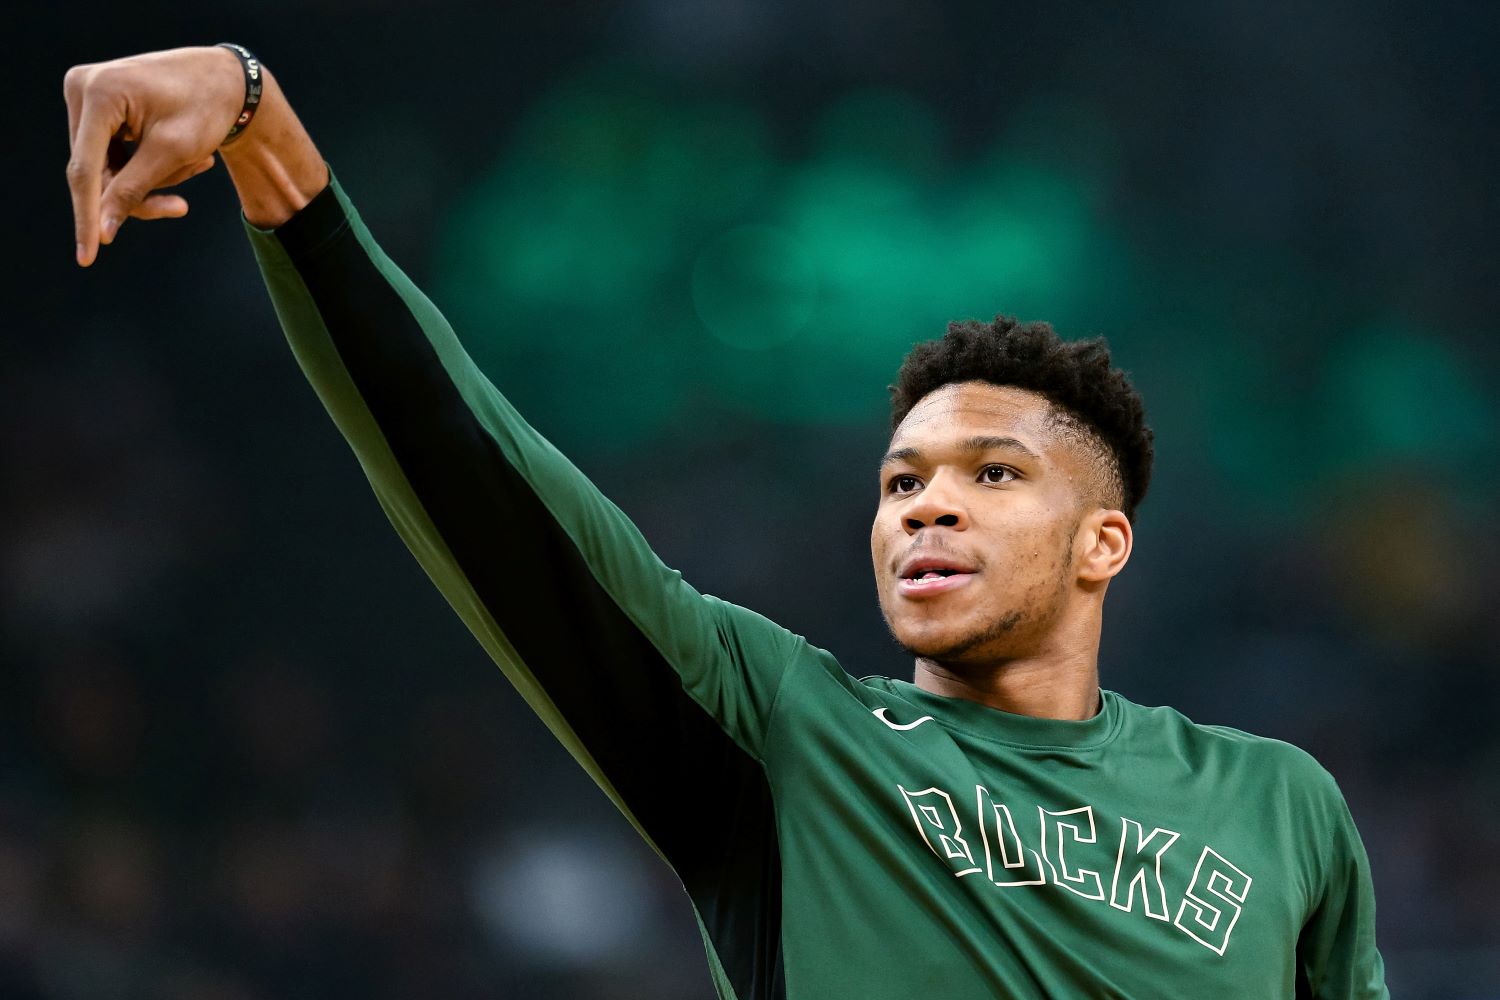 Giannis Antetokounmpo made a major change to his game this offseason, and it already appears to be paying dividends for the Bucks superstar.